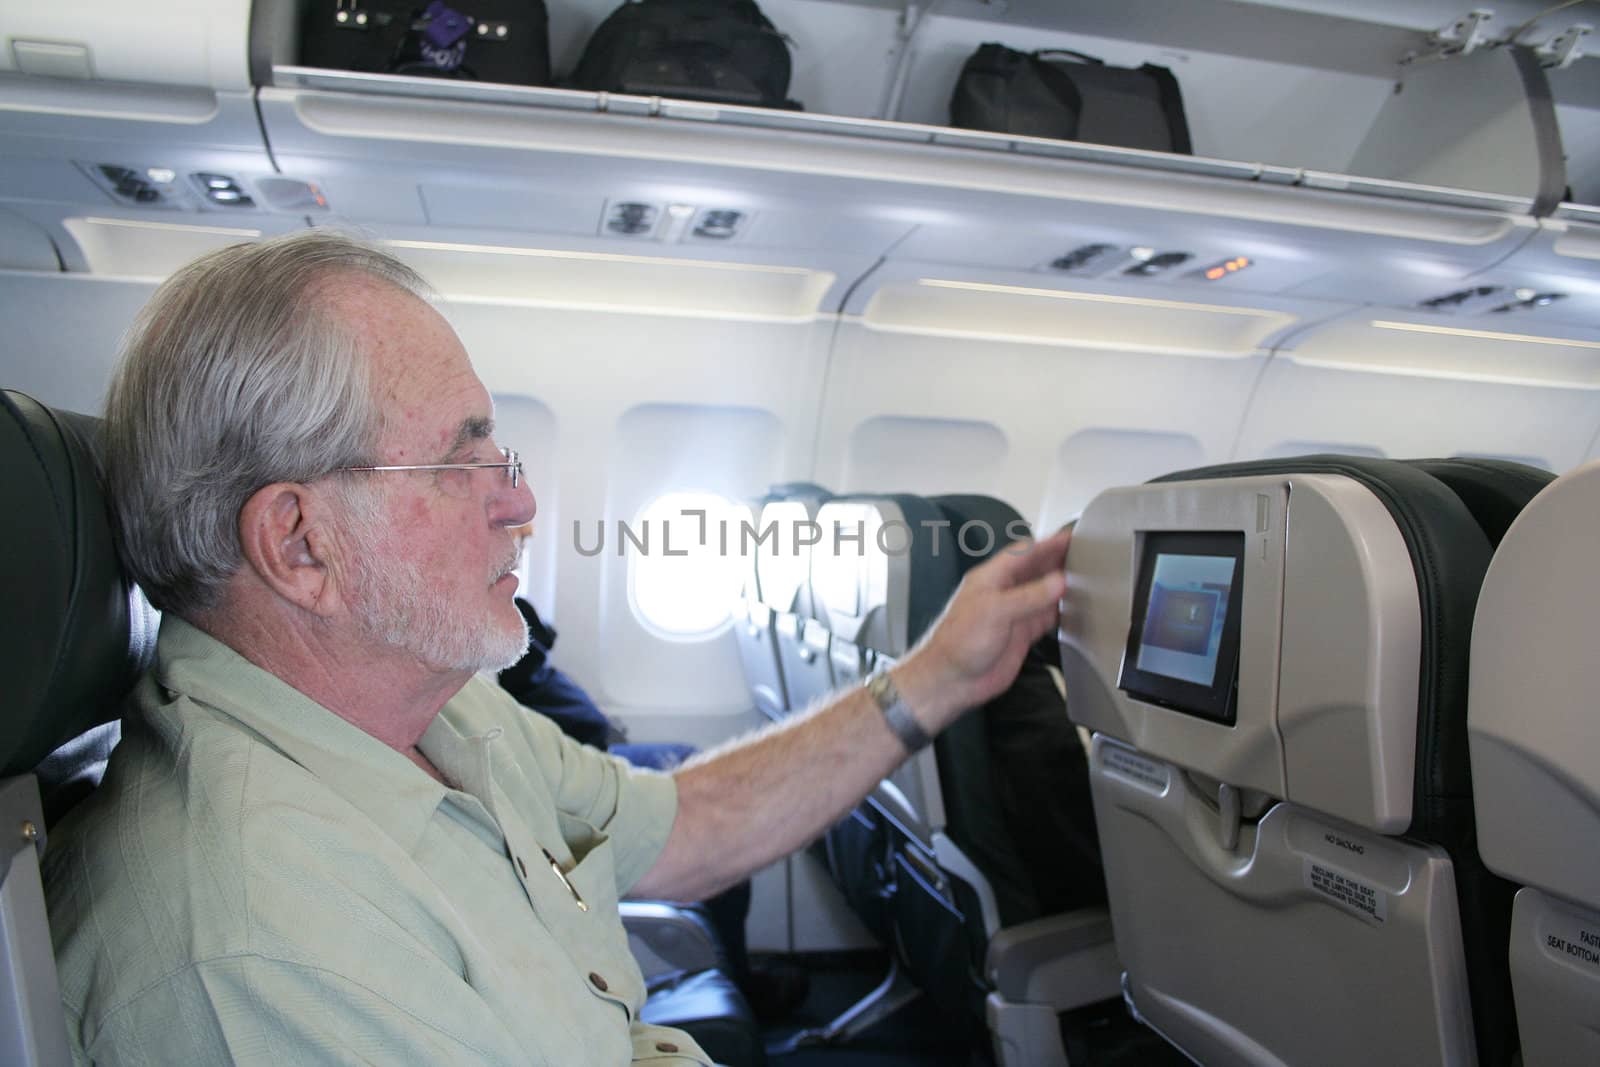 Man on airplane looking at inflight tv